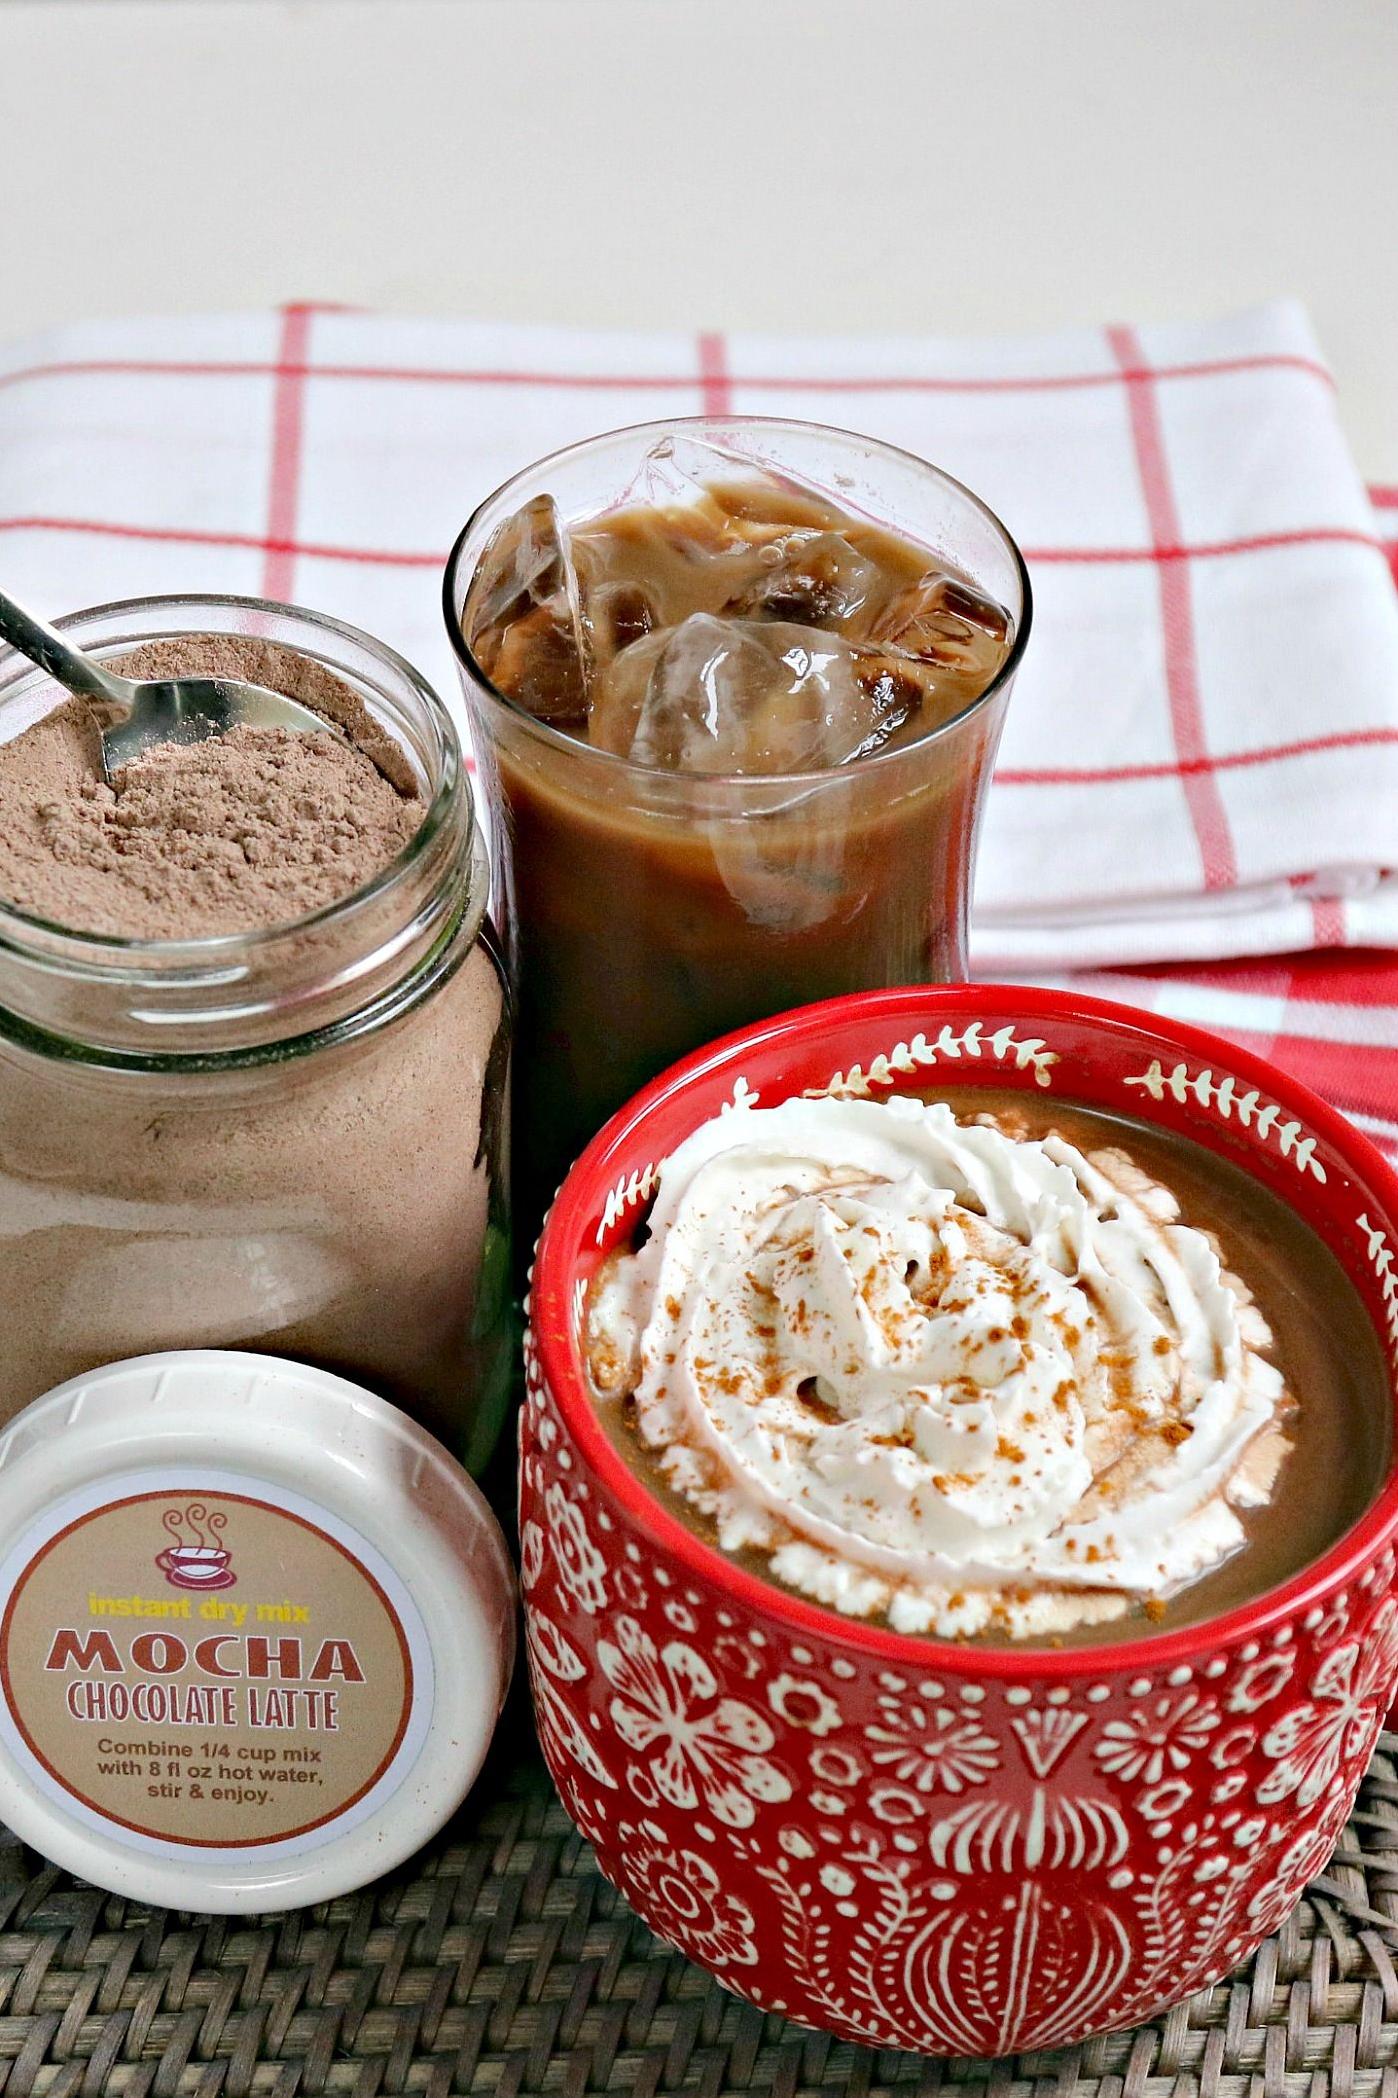  Our Café Mocha Drink Mix is the perfect blend of coffee and chocolate